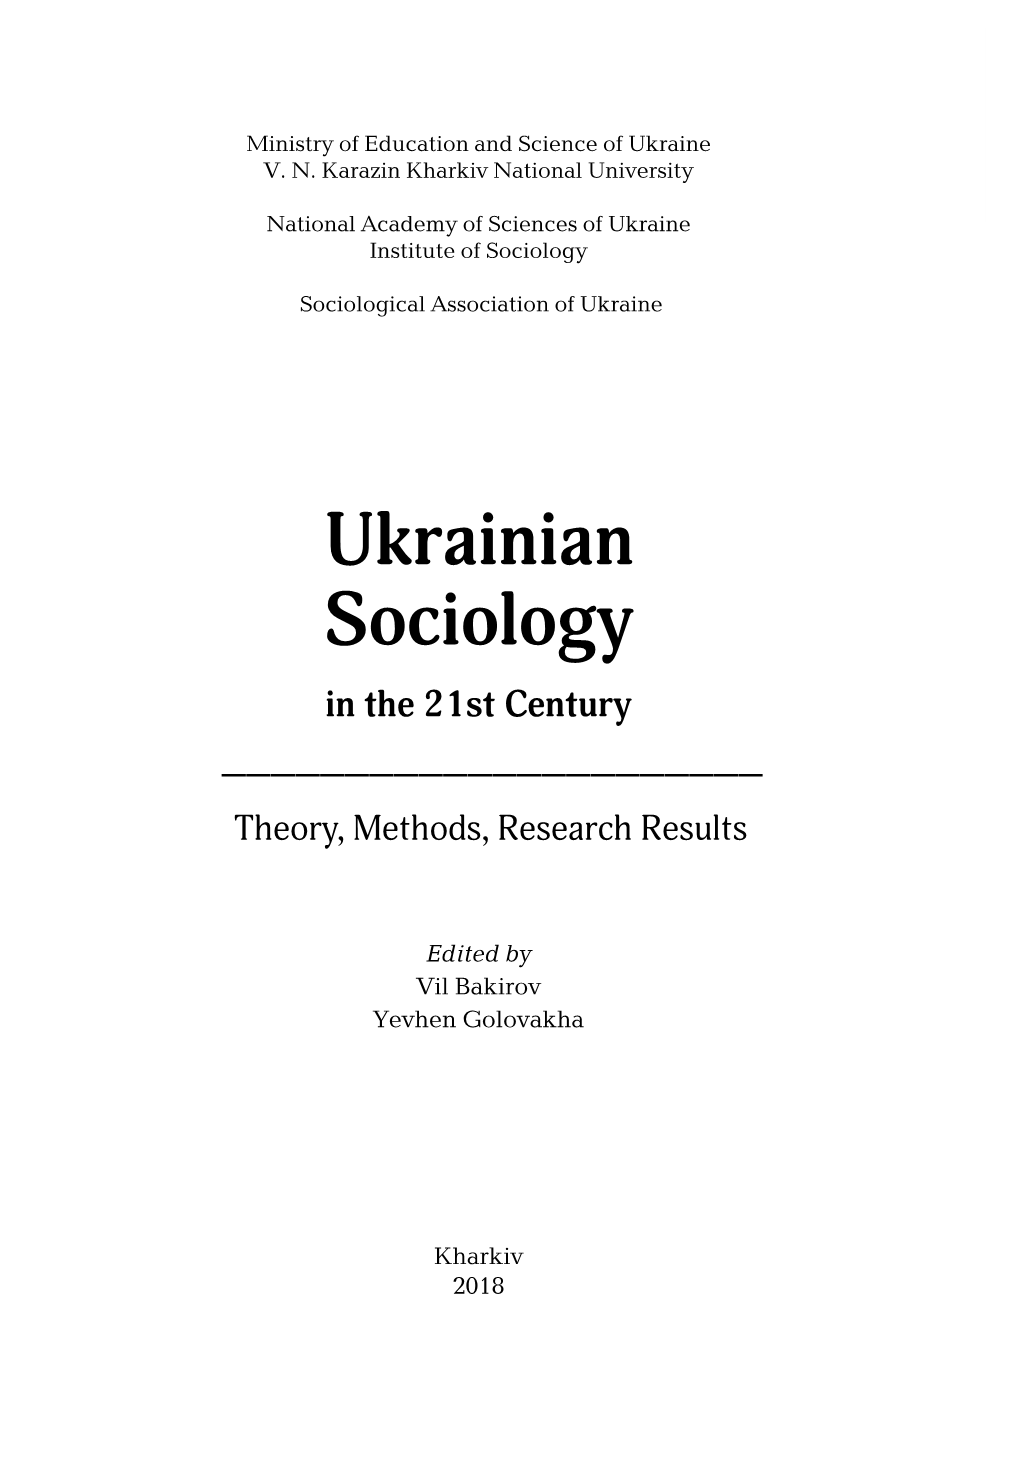 Ukrainian Sociology in the 21St Century: Theory, Methods, Research Results 1